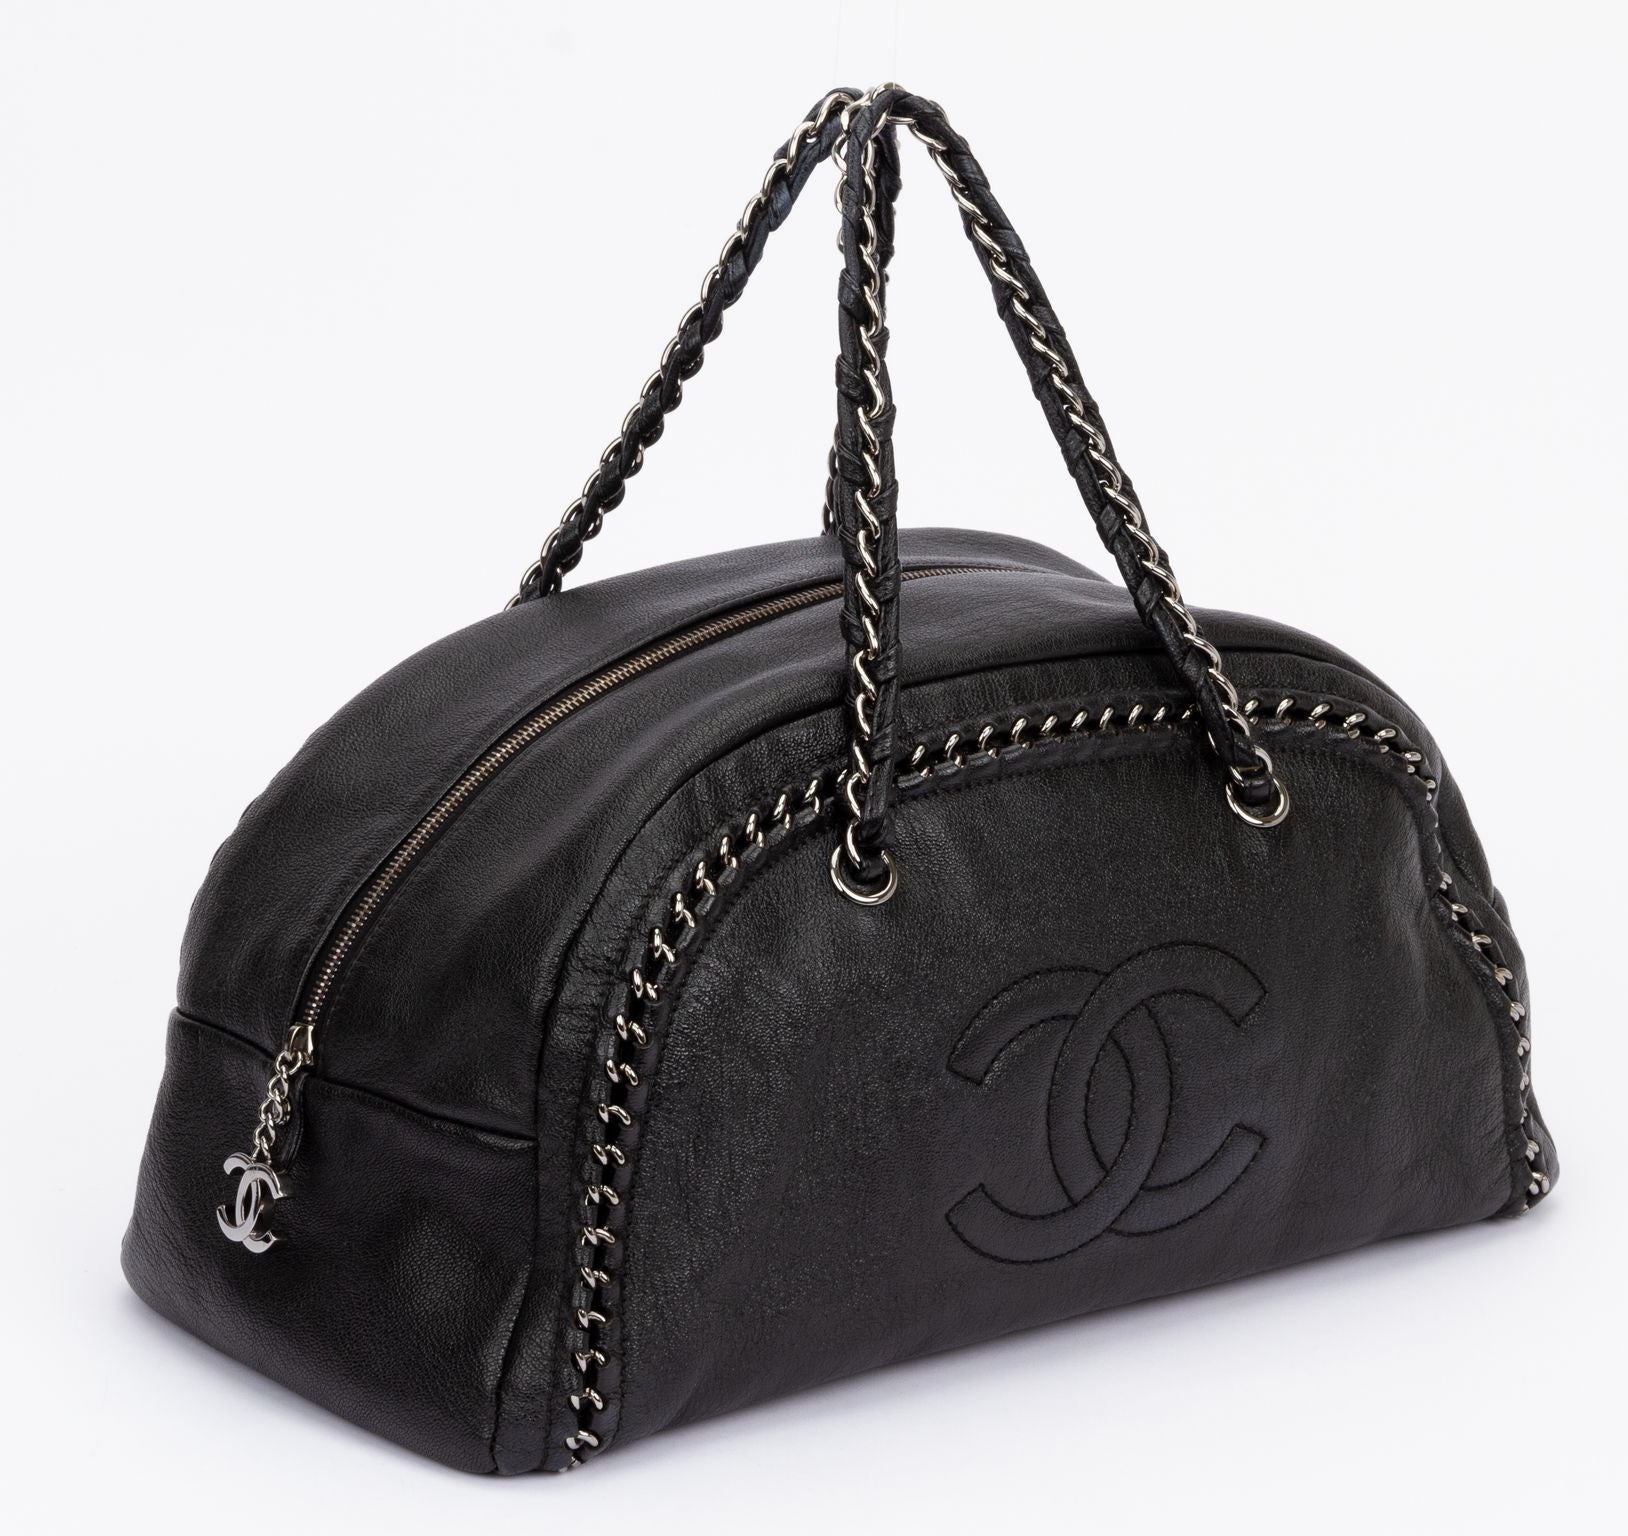 CHANEL, Bags, Auth Chanel Medium Luxe Ligne Bowler Bag Jebwa 9j85